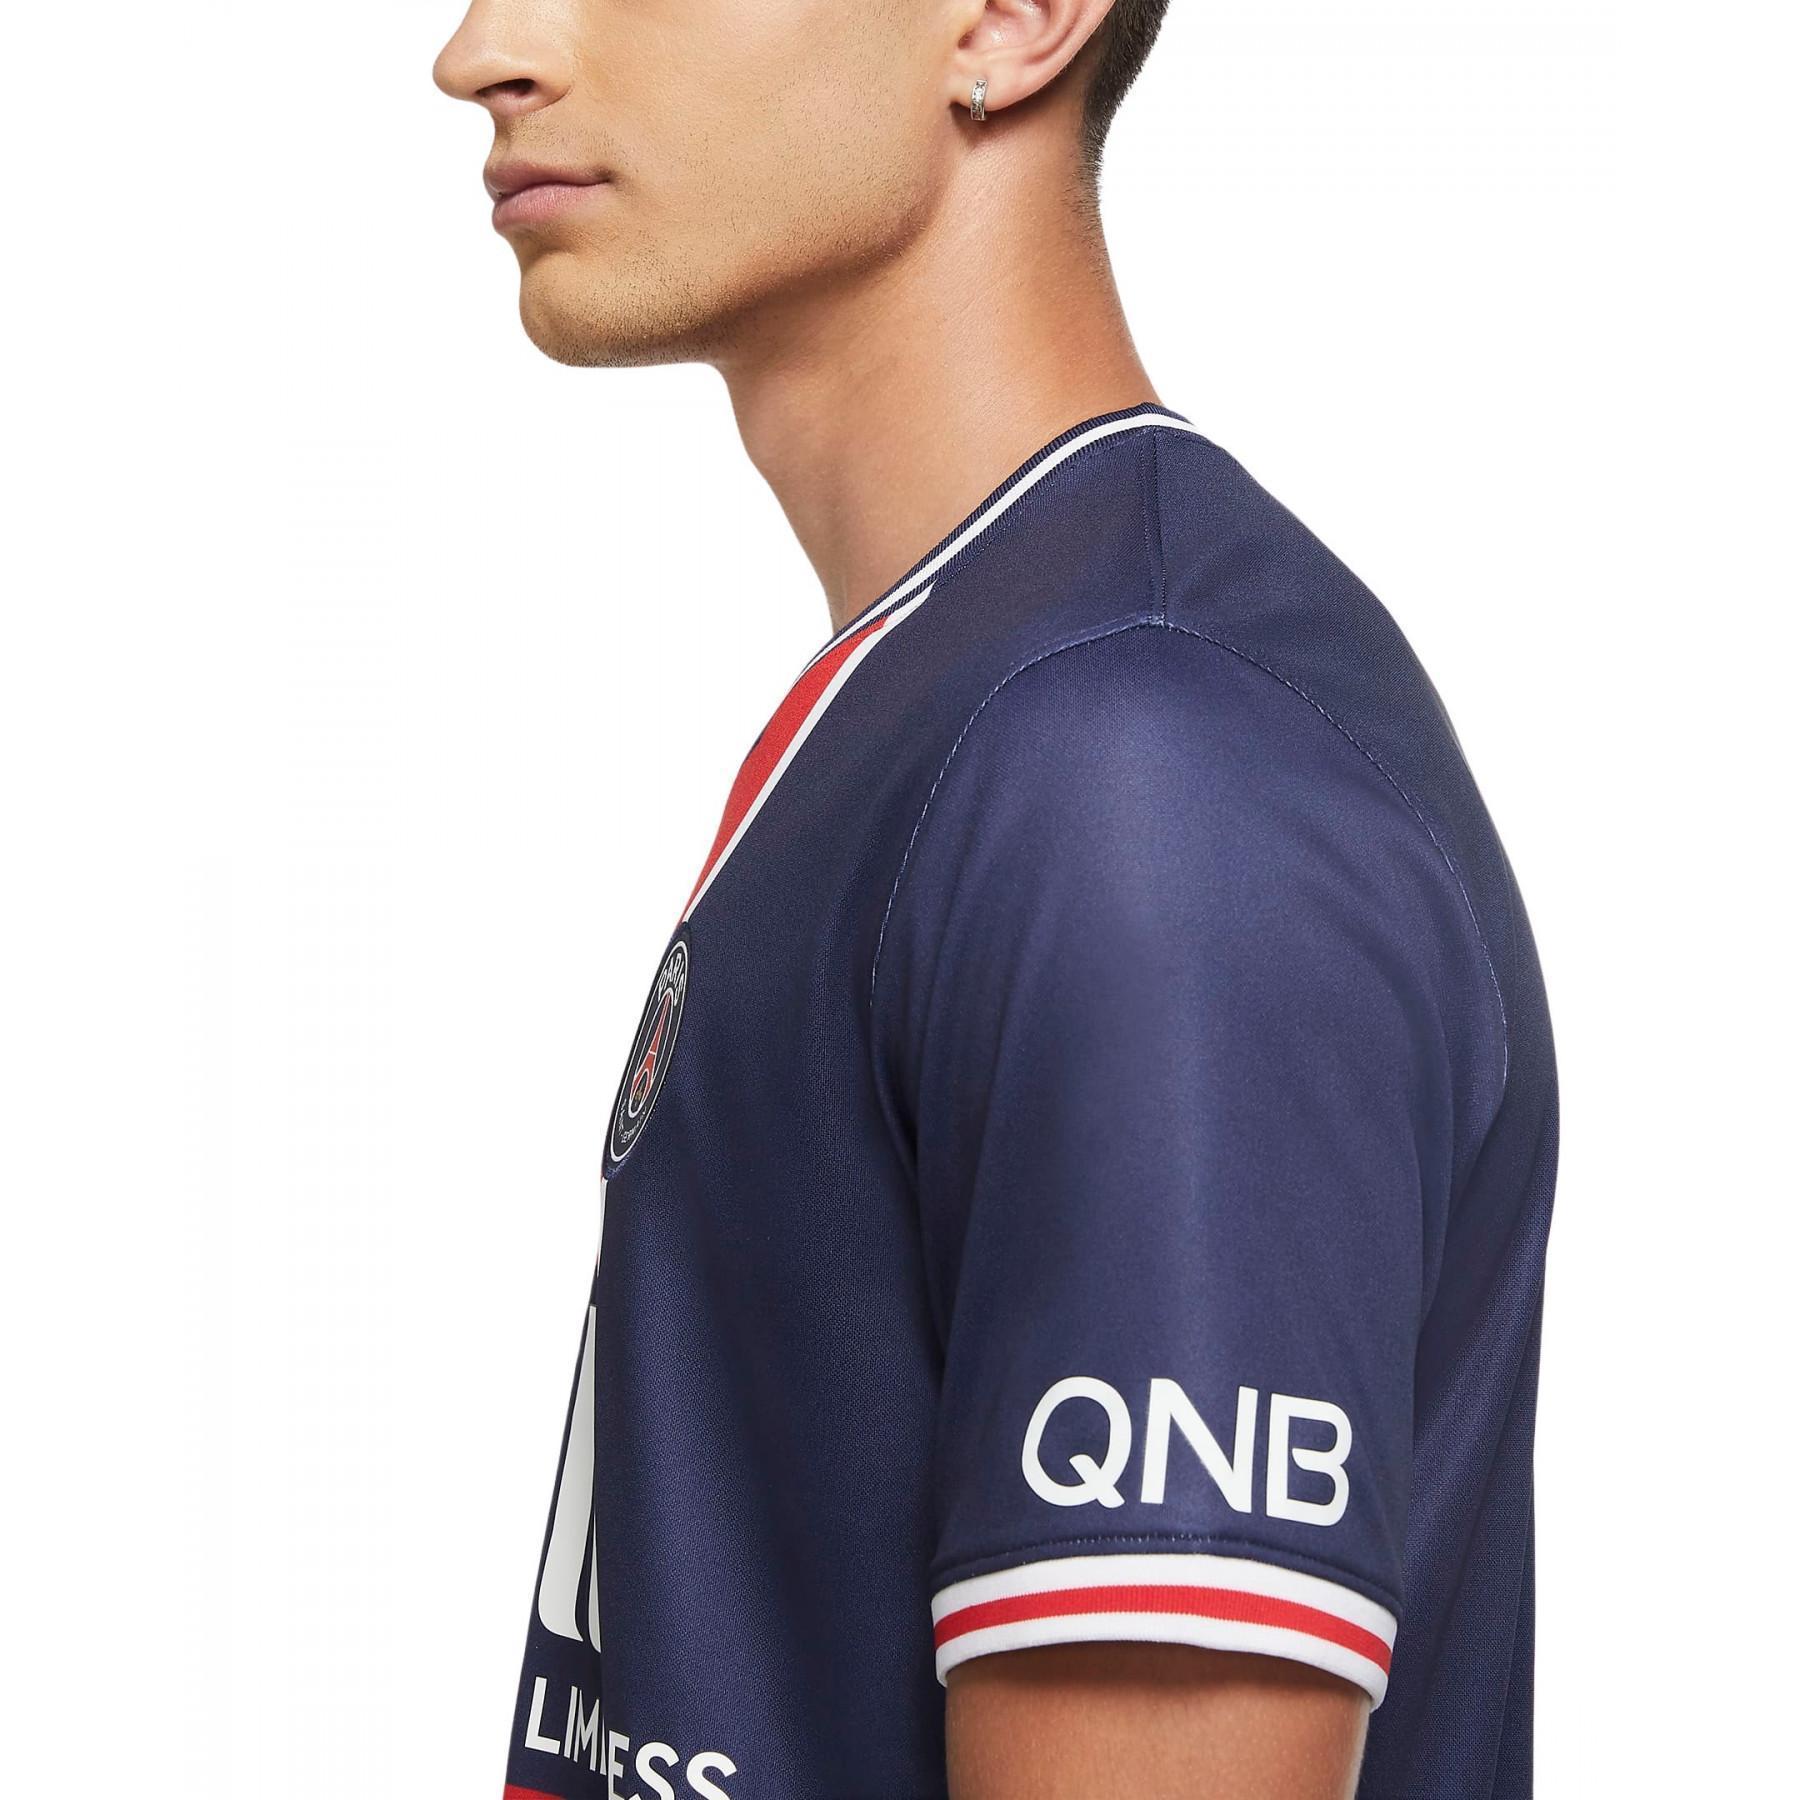 Home jersey PSG 2020/21